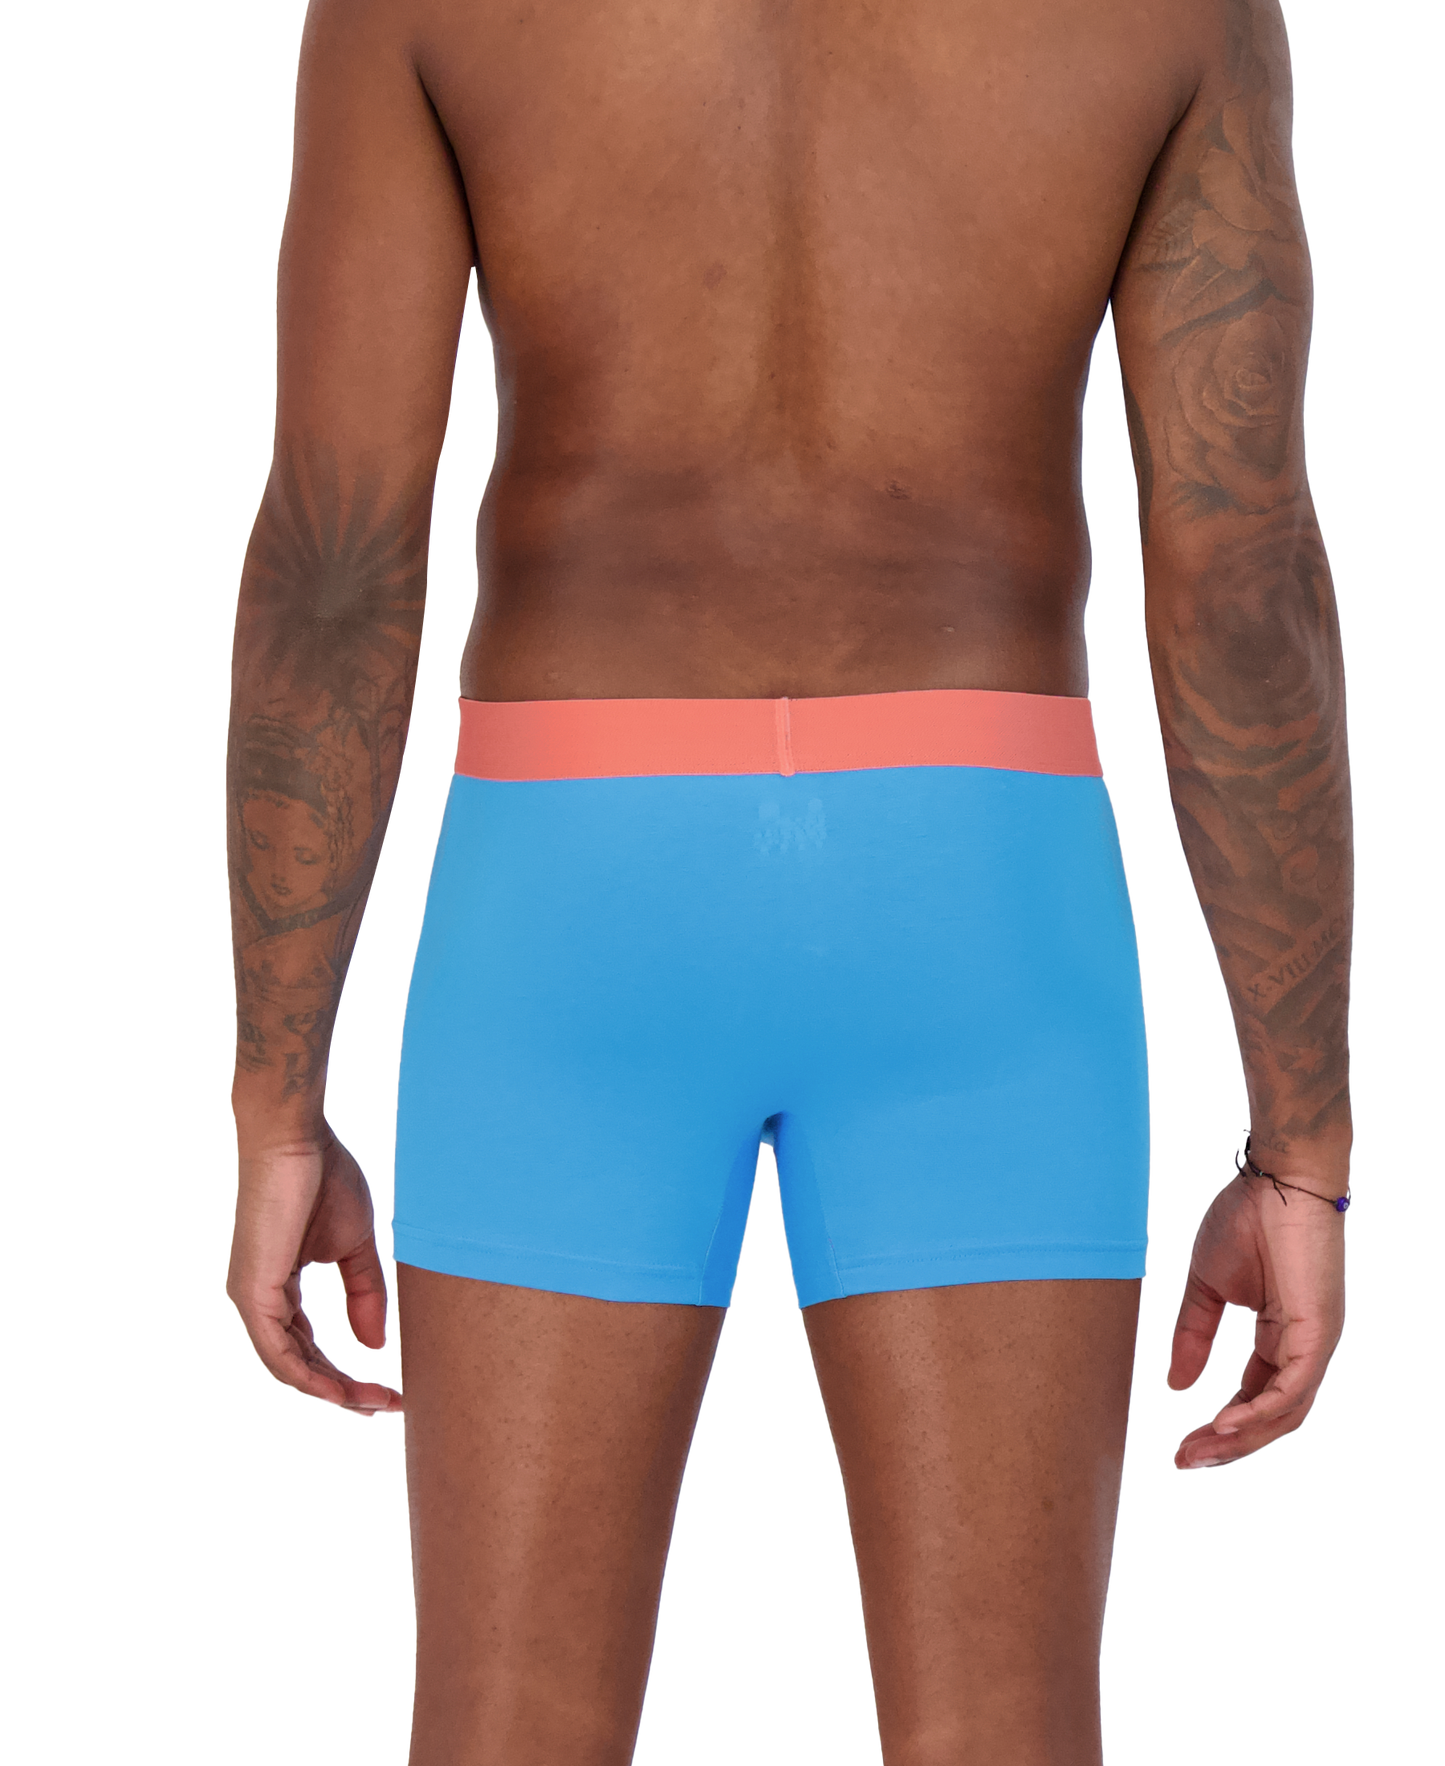 Men's Boxer Briefs with Fly from Wood